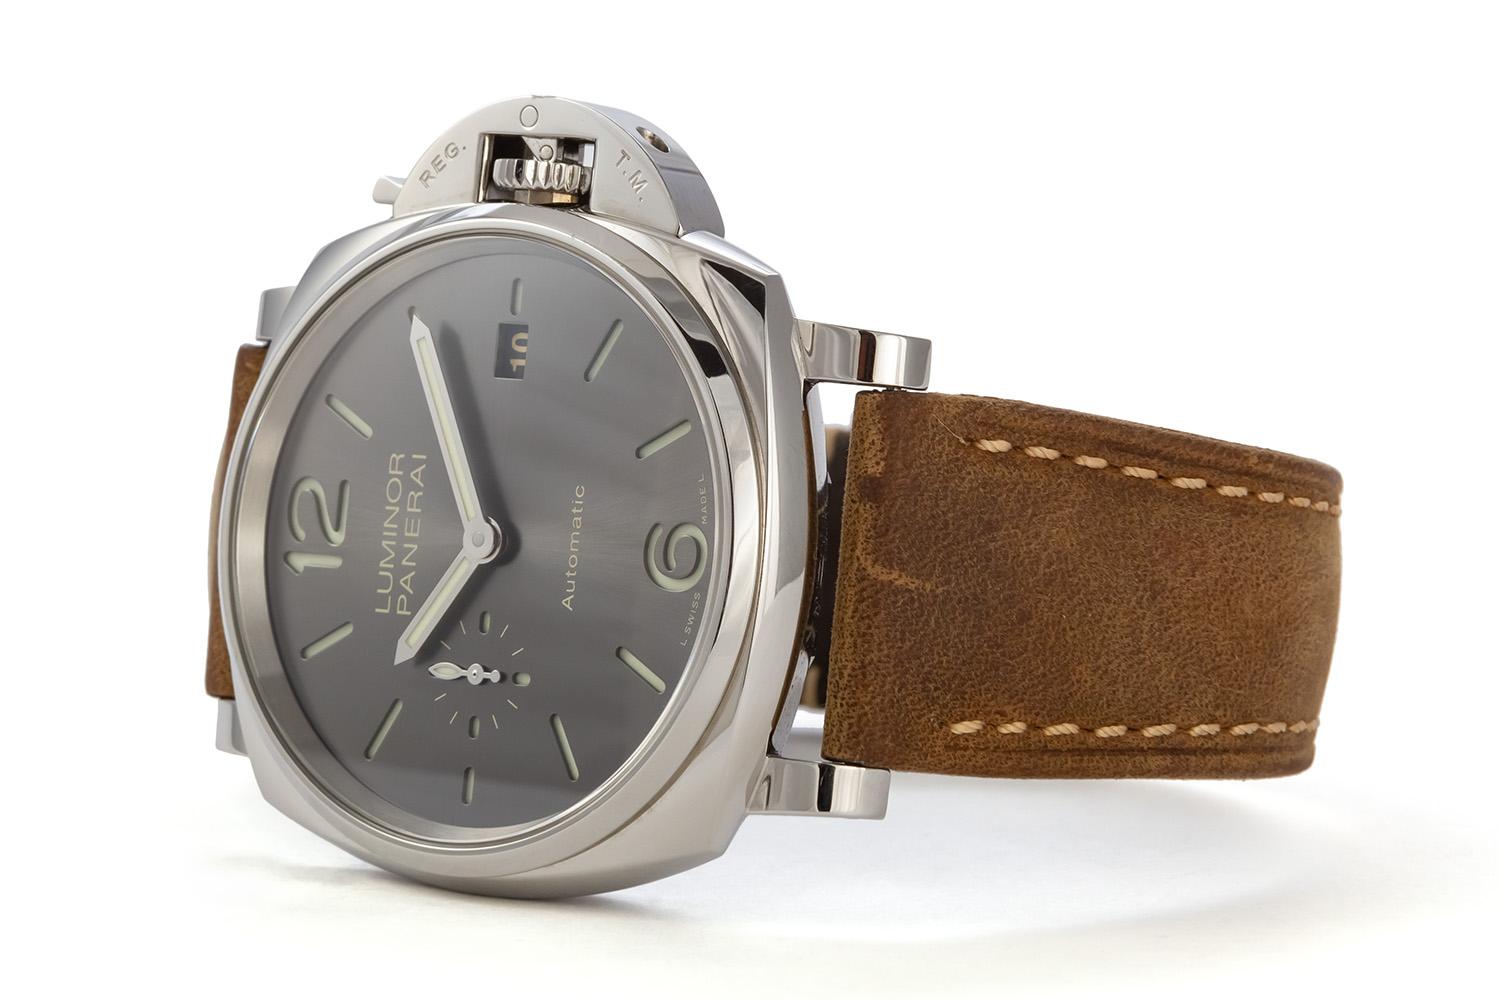 We are pleased to offer this 2019 Panerai Luminor Due 3 Day Stainless Steel 42mm PAM00904 with Original Box & Papers. This stylish mens watch features a 42mm stainless steel case, automatic P.900 calibre movement with 3 day power reserve,